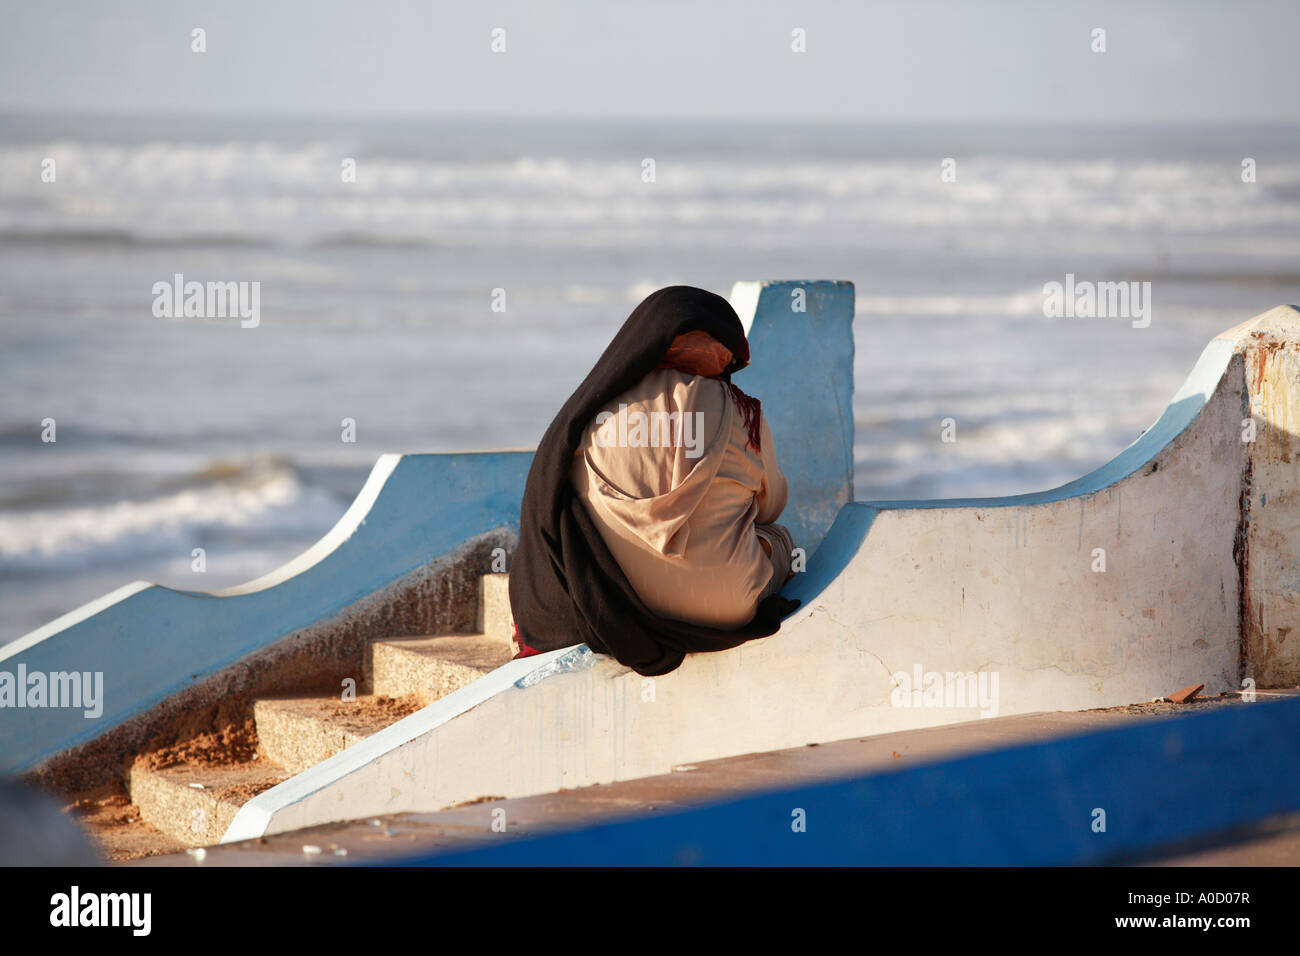 A Moroccan Lady Shelters from the Sun at Sidi Bouzid Stock Photo